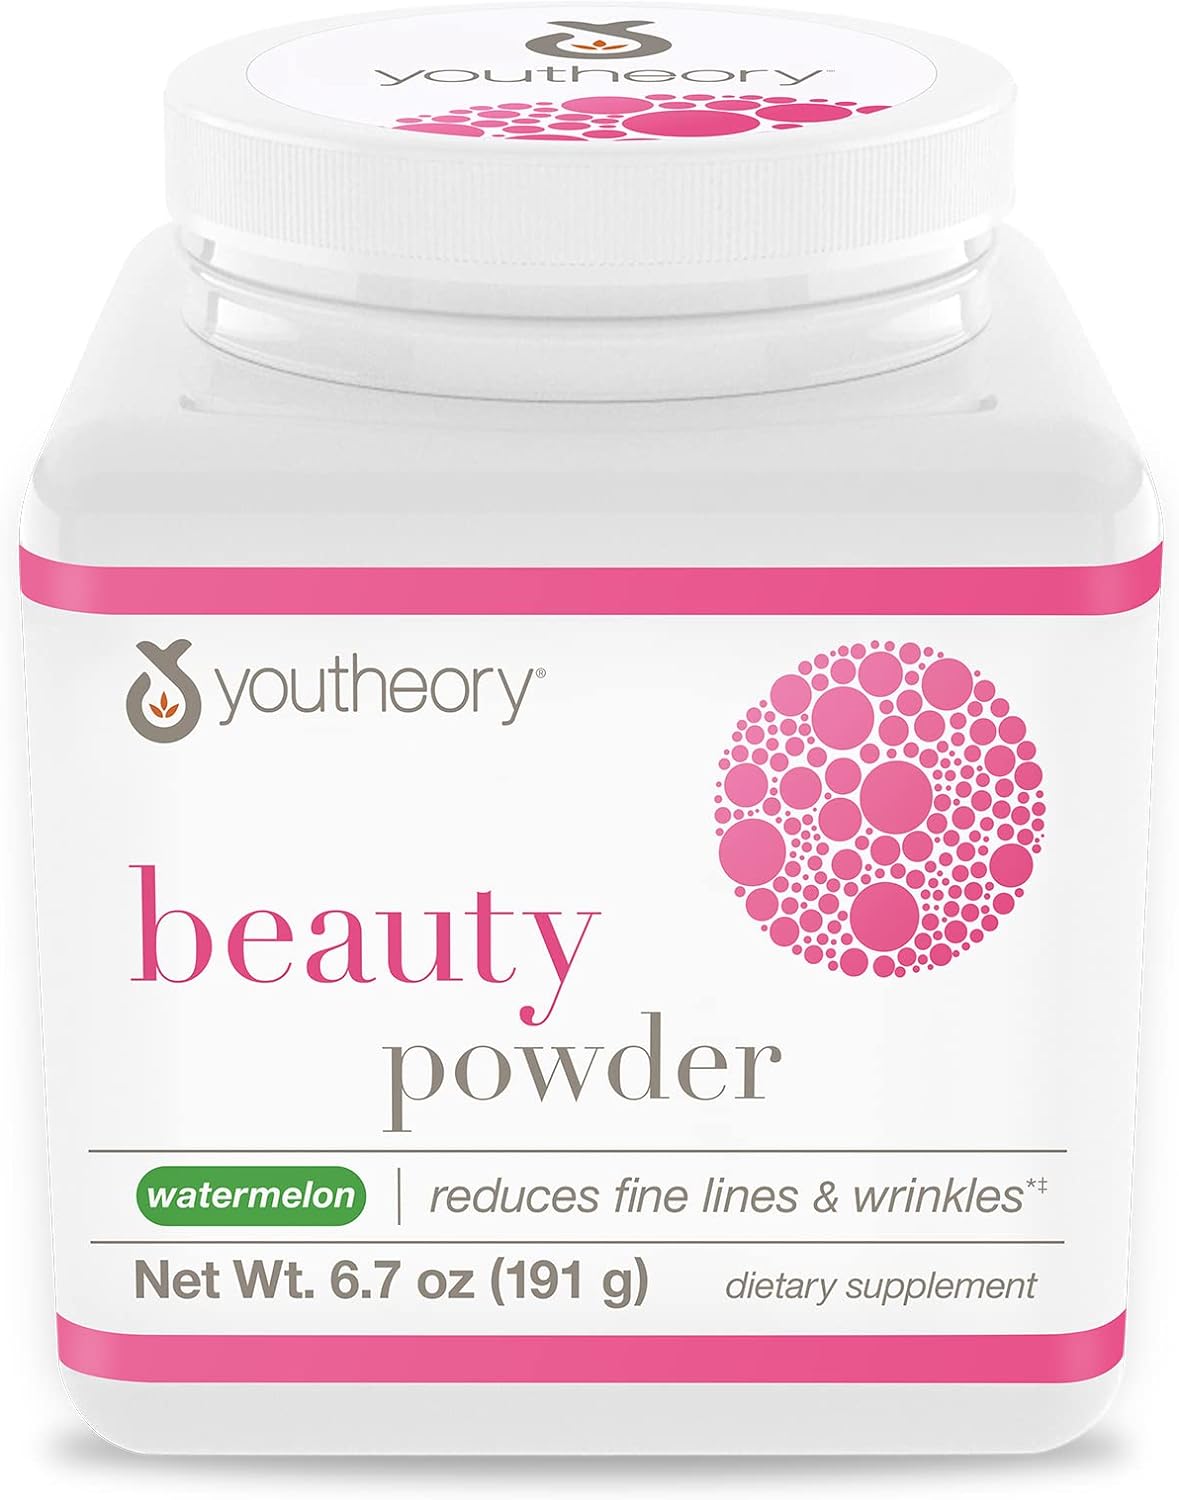 Youtheory Beauty Powder Watermelon Flavor, 21 Servings6.7 Ounces